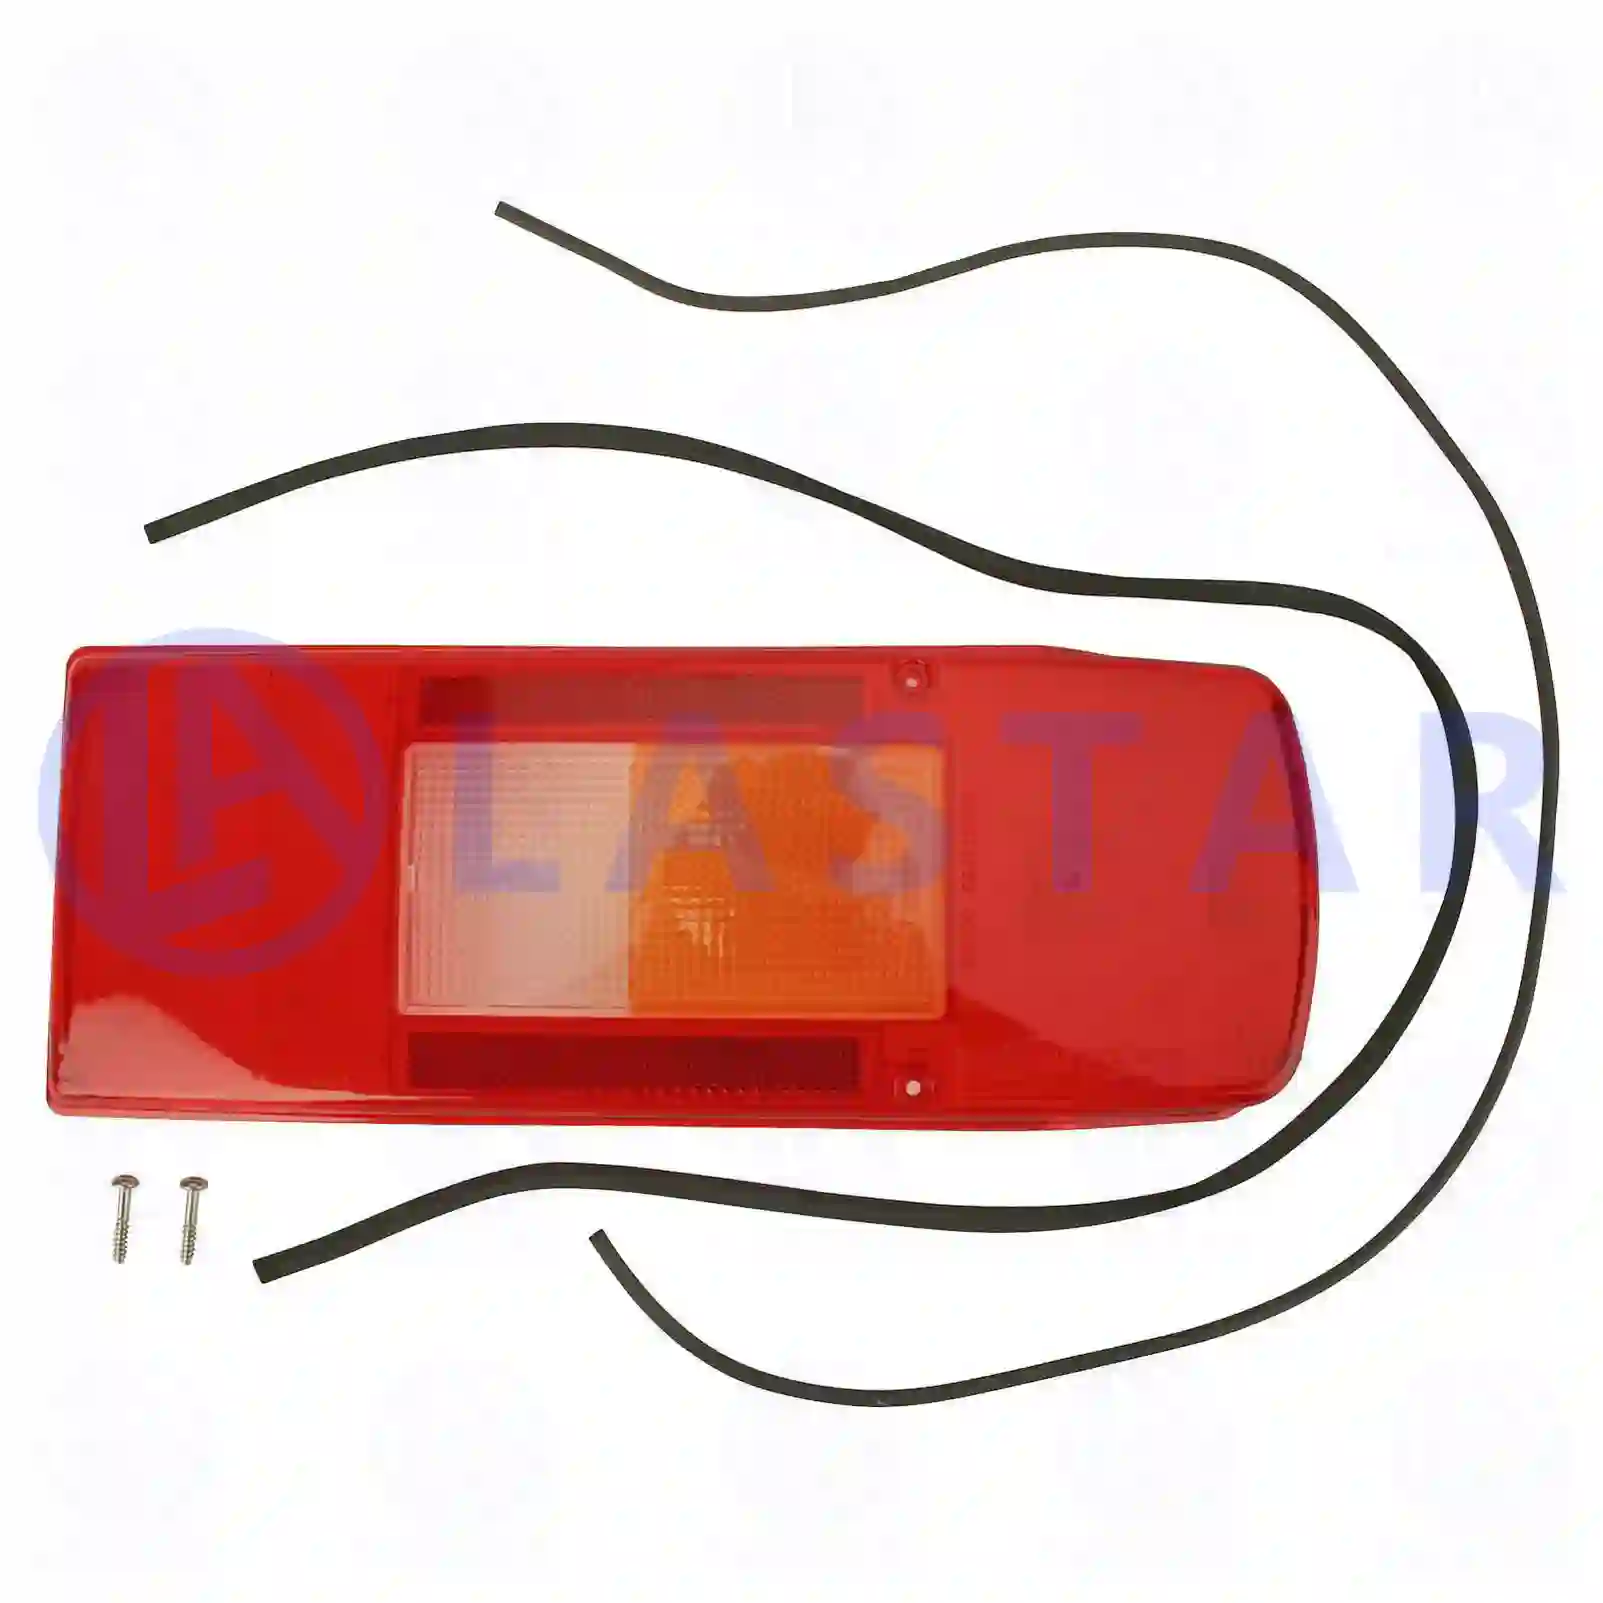 Tail lamp glass, 77711041, 20425732, 20910229, ZG21075-0008 ||  77711041 Lastar Spare Part | Truck Spare Parts, Auotomotive Spare Parts Tail lamp glass, 77711041, 20425732, 20910229, ZG21075-0008 ||  77711041 Lastar Spare Part | Truck Spare Parts, Auotomotive Spare Parts